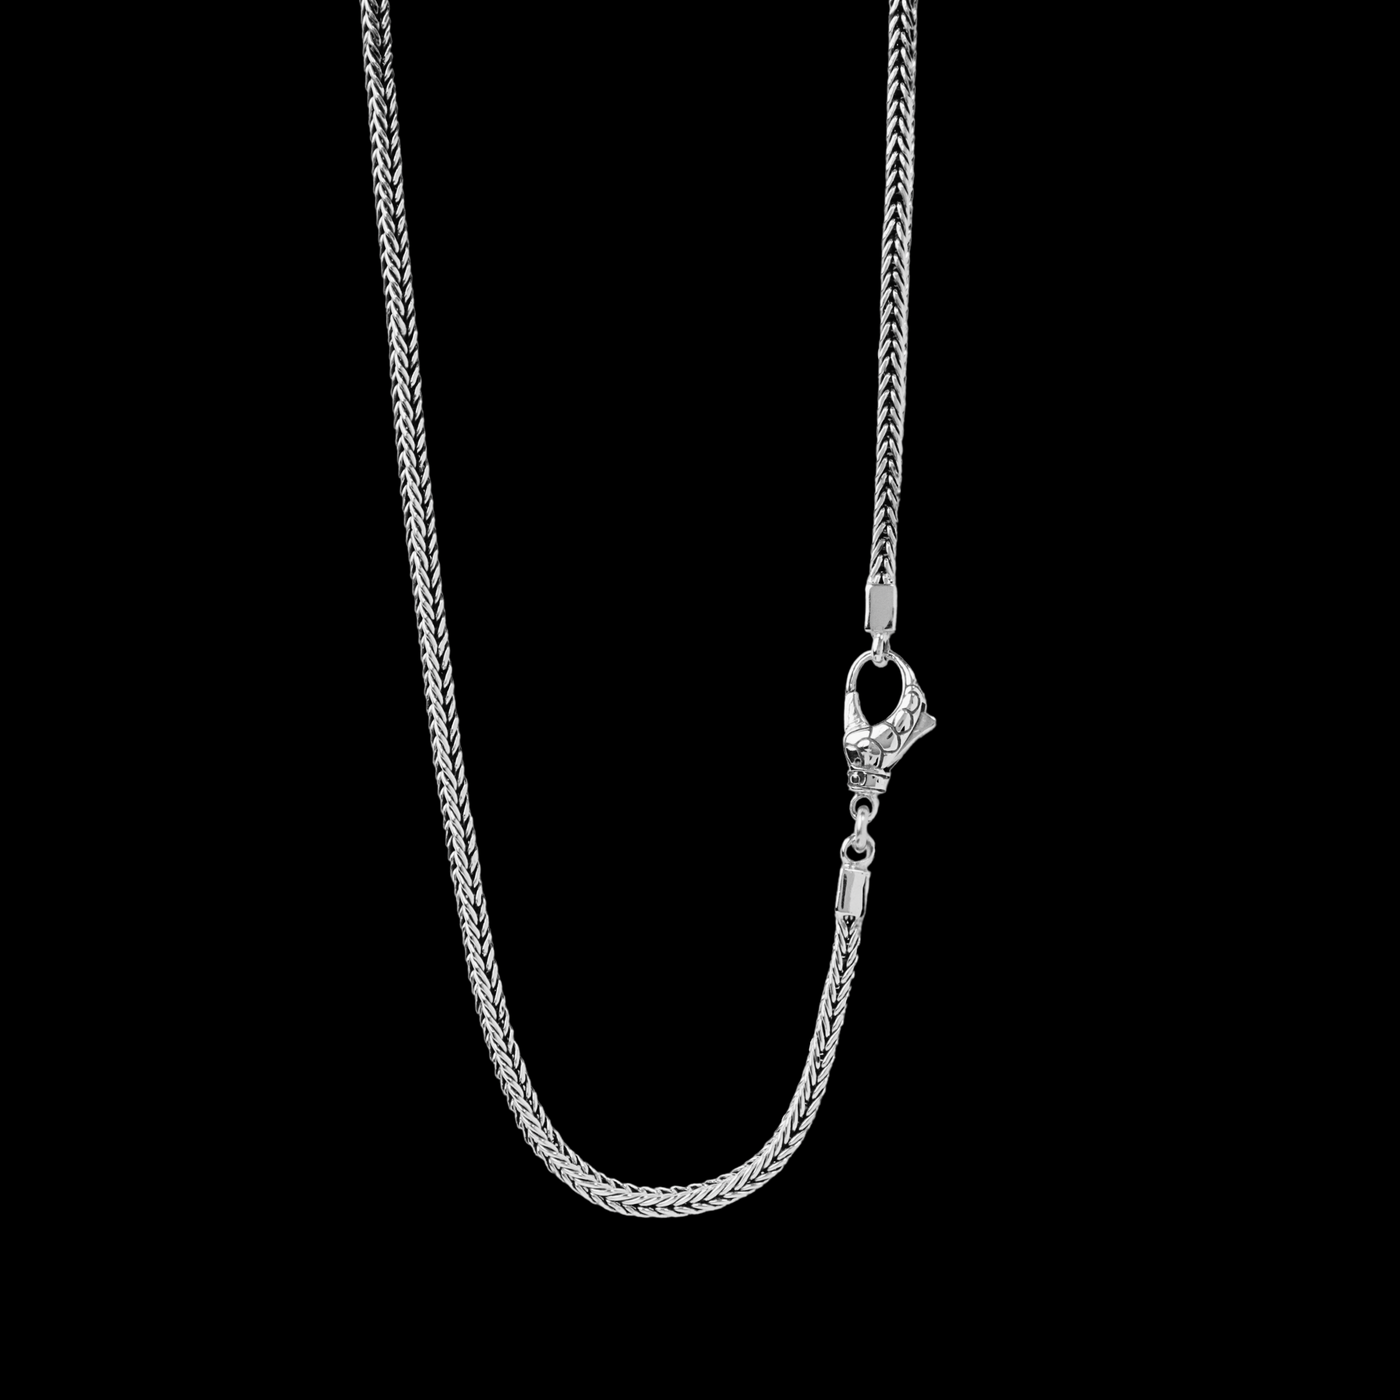 Foxtail silver necklace 3mm